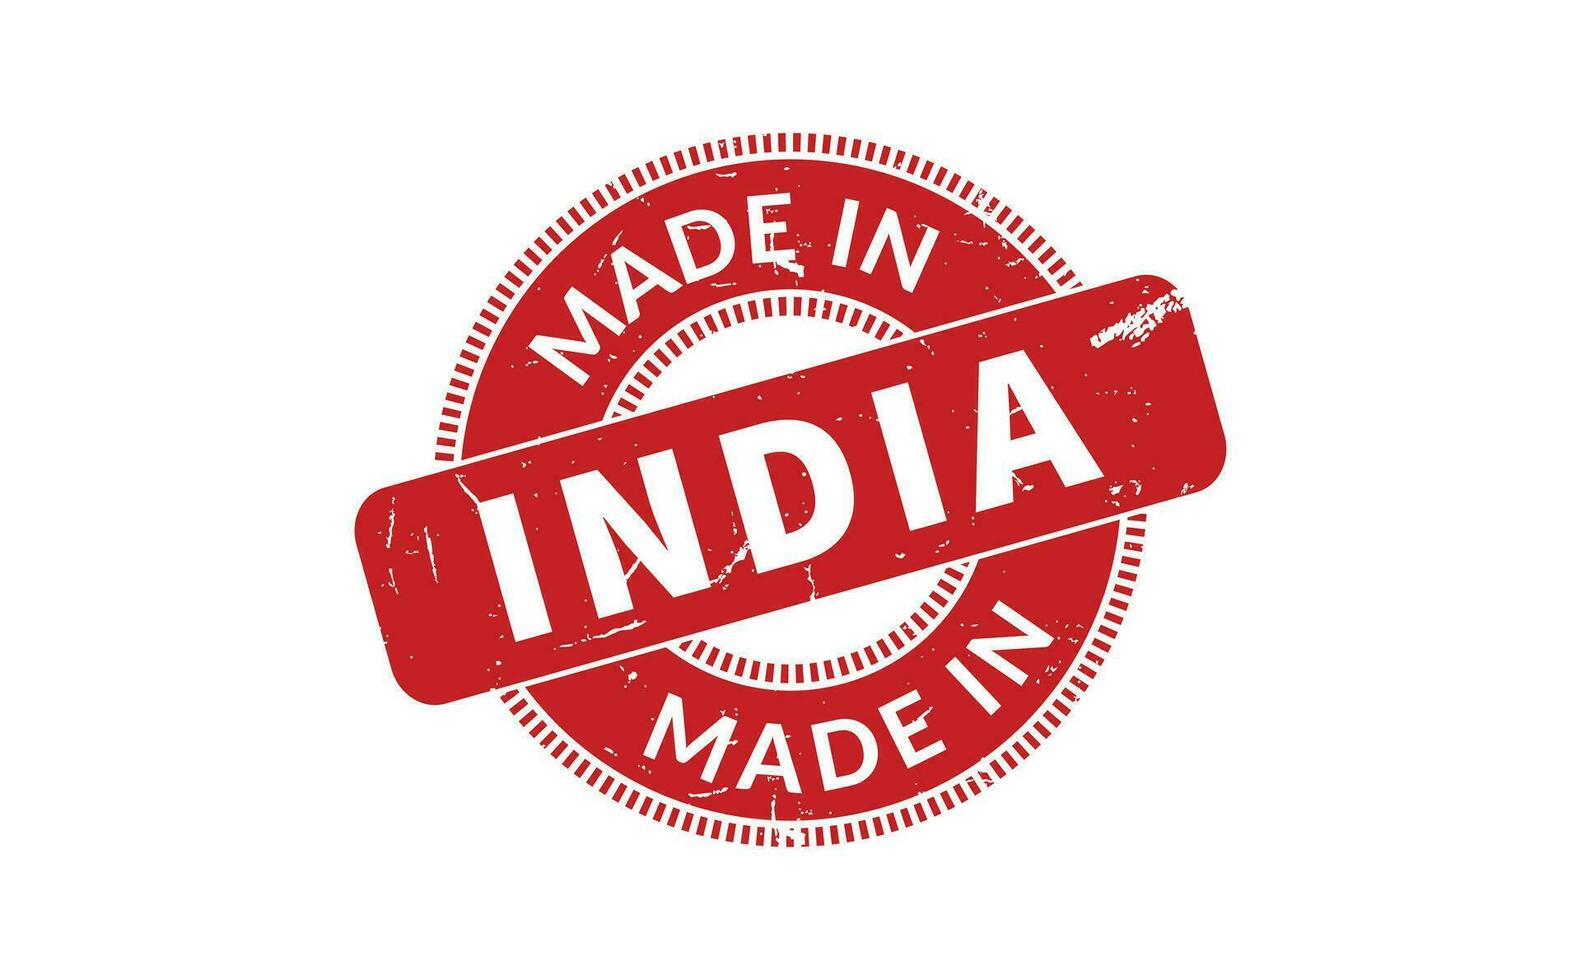 Made In India Rubber Stamp vector